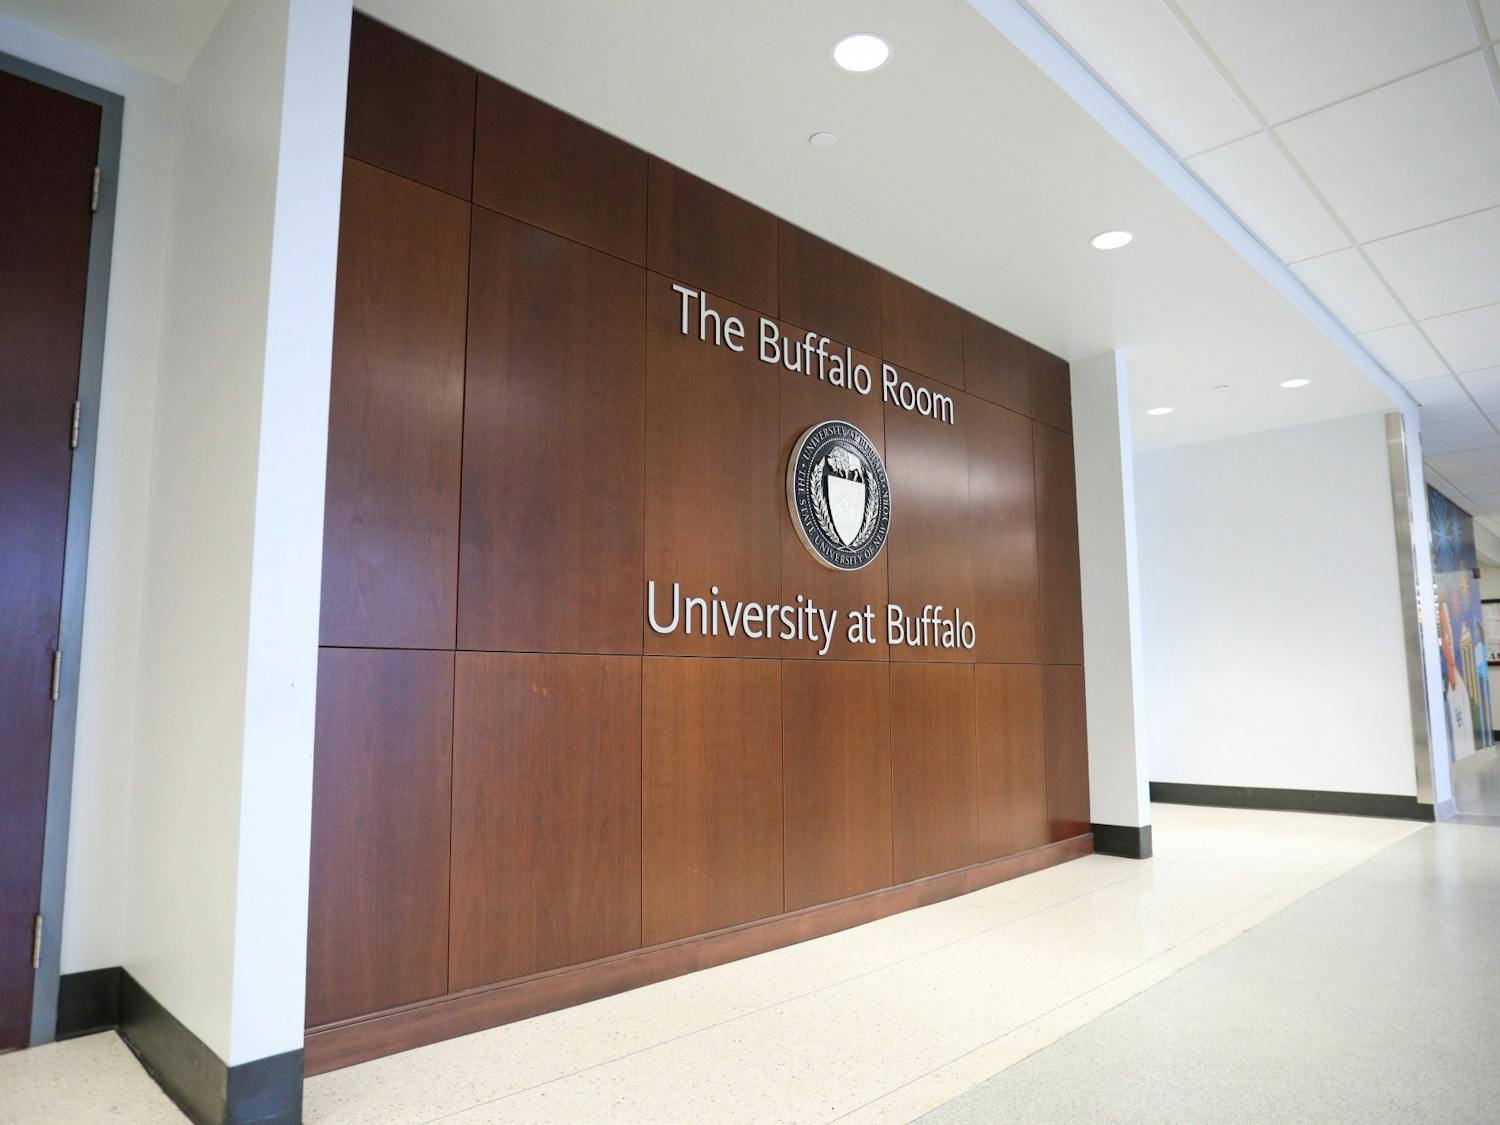 The UB Council meets four times a year, typically in the Buffalo Room in Capen Hall.